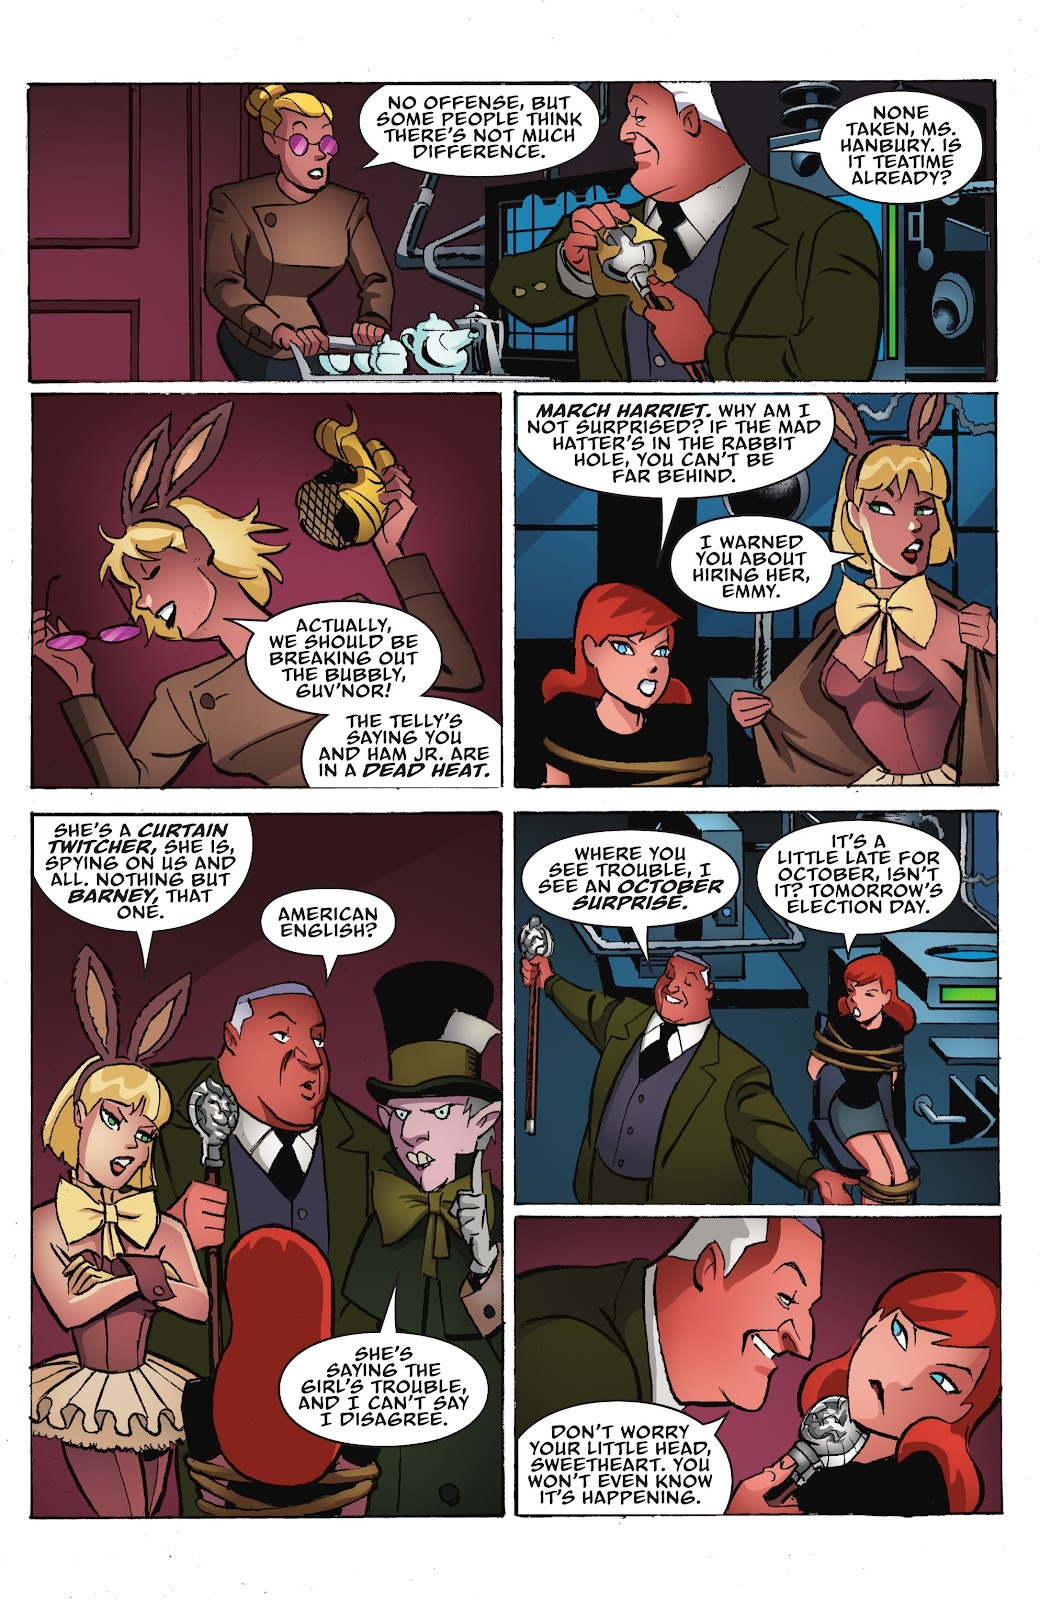 Batman: The Adventures Continue: Season Two issue 7 - Page 4